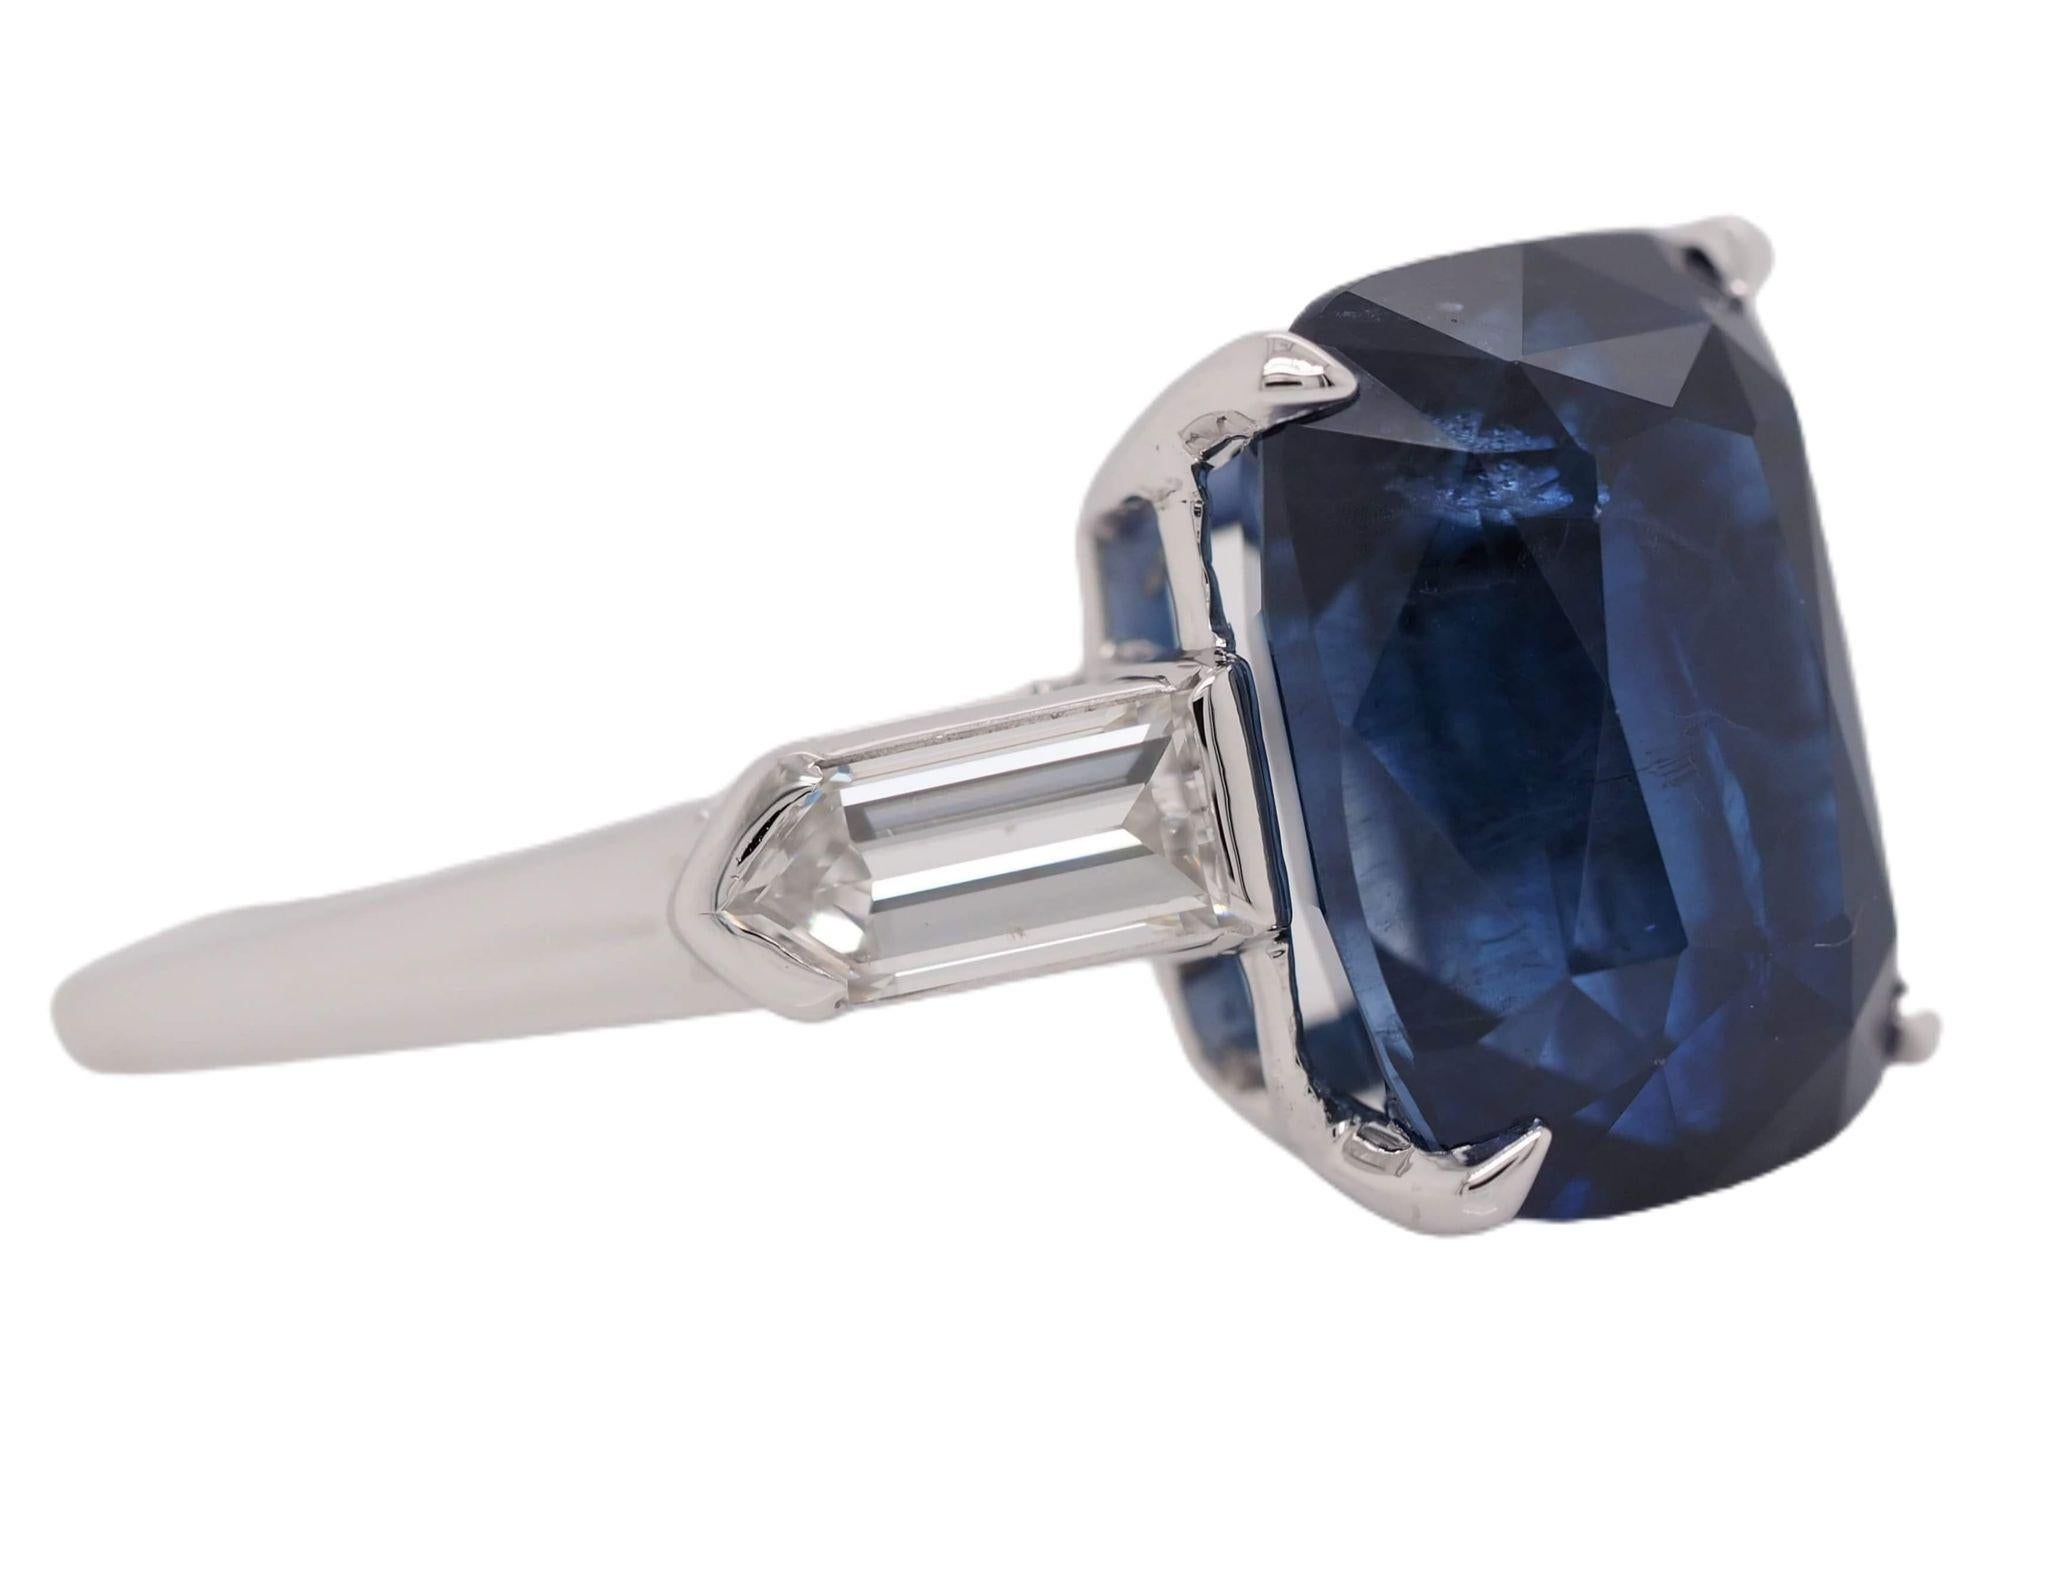 This Bailey Banks & Biddle sapphire ring is fresh off of the jewelers bench. The center stone is a natural GIA Certified 6.97 carat Cushion Cut blue sapphire. It is accented with two bullet cut diamonds weighing 0.74 carats total. This lovely piece